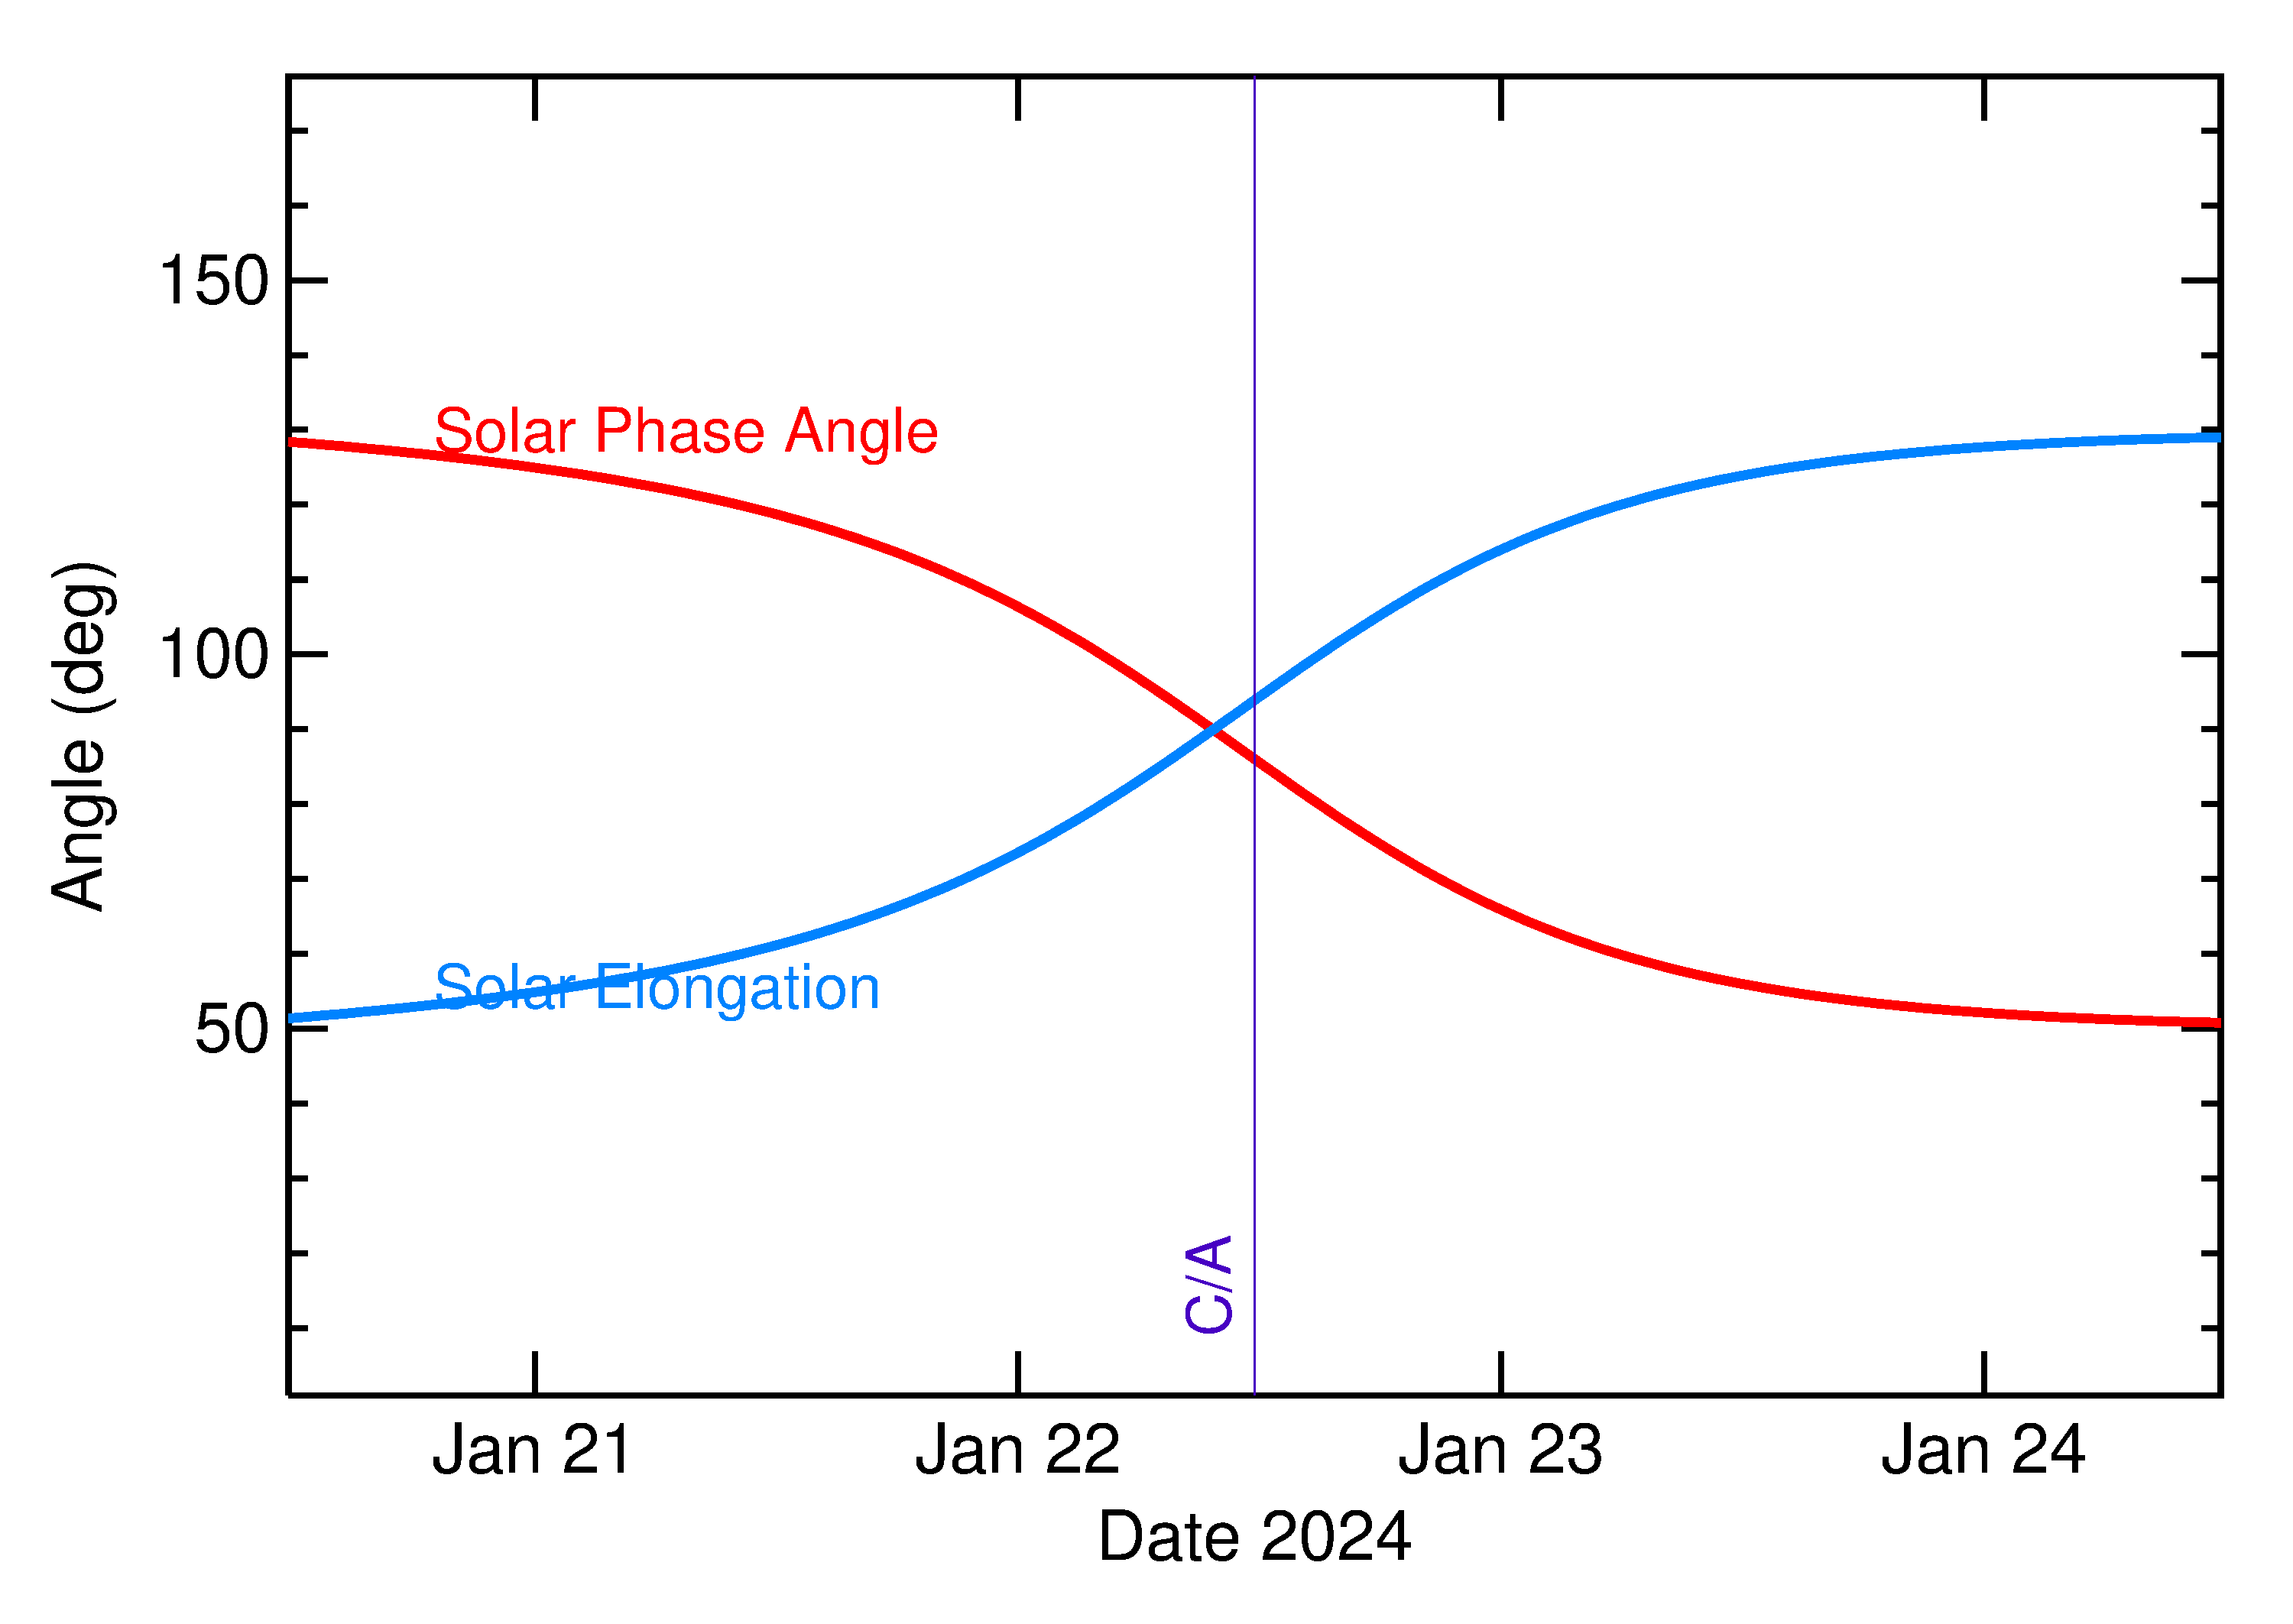 Solar Elongation and Solar Phase Angle of 2024 BR2 in the days around closest approach